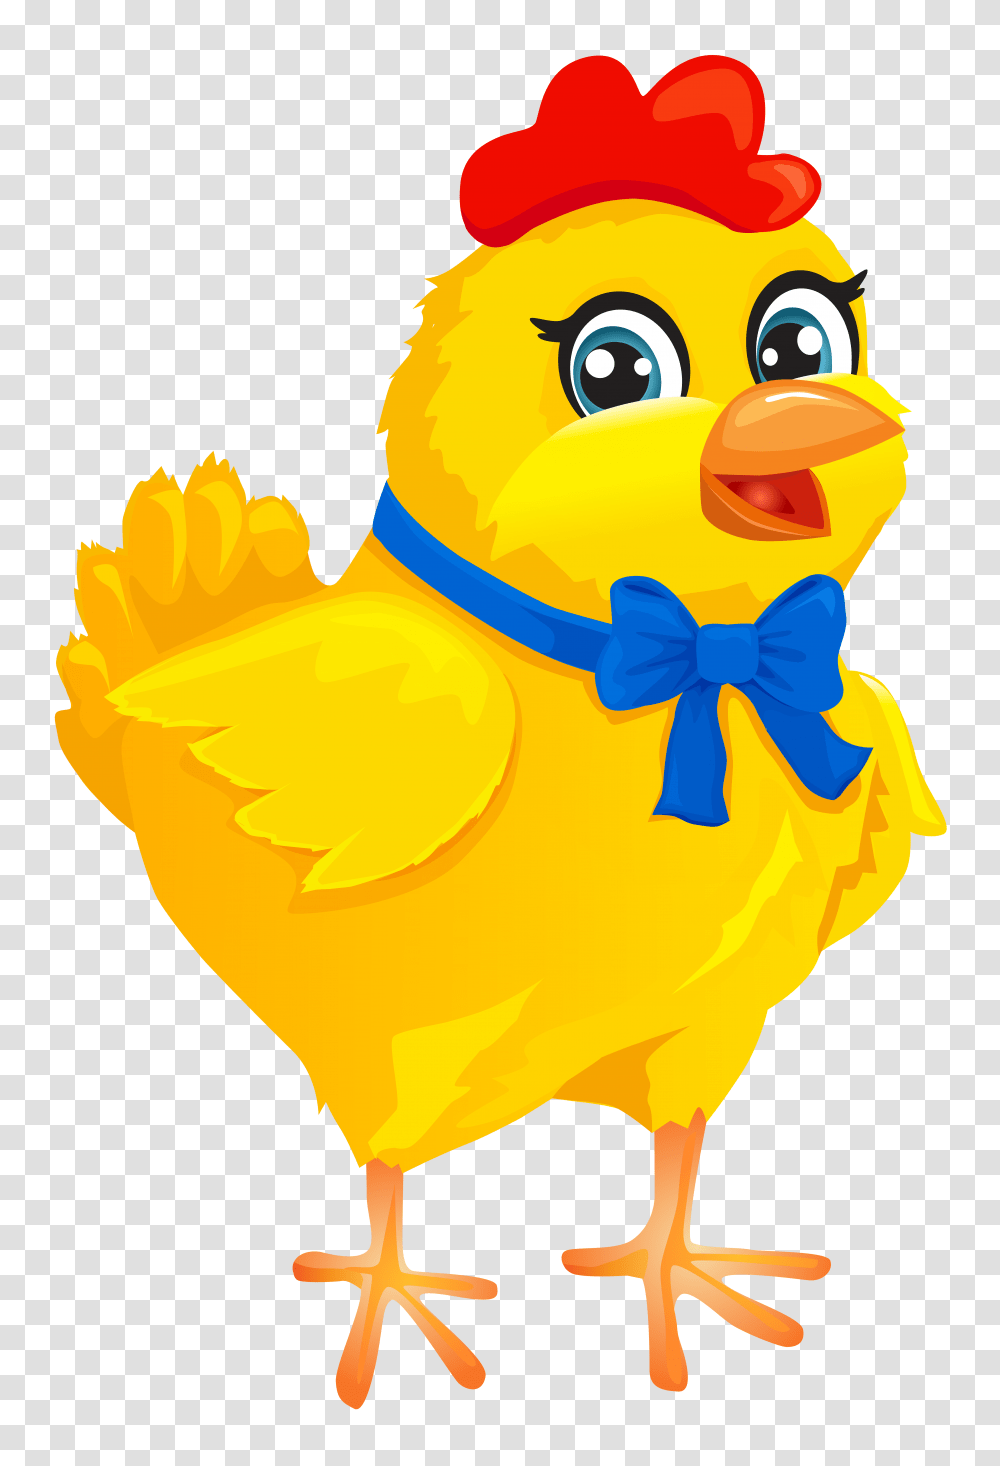 A Cartoon Yellow Easter Chick Baby Chicken Bird Images, Animal, Fowl, Poultry Transparent Png